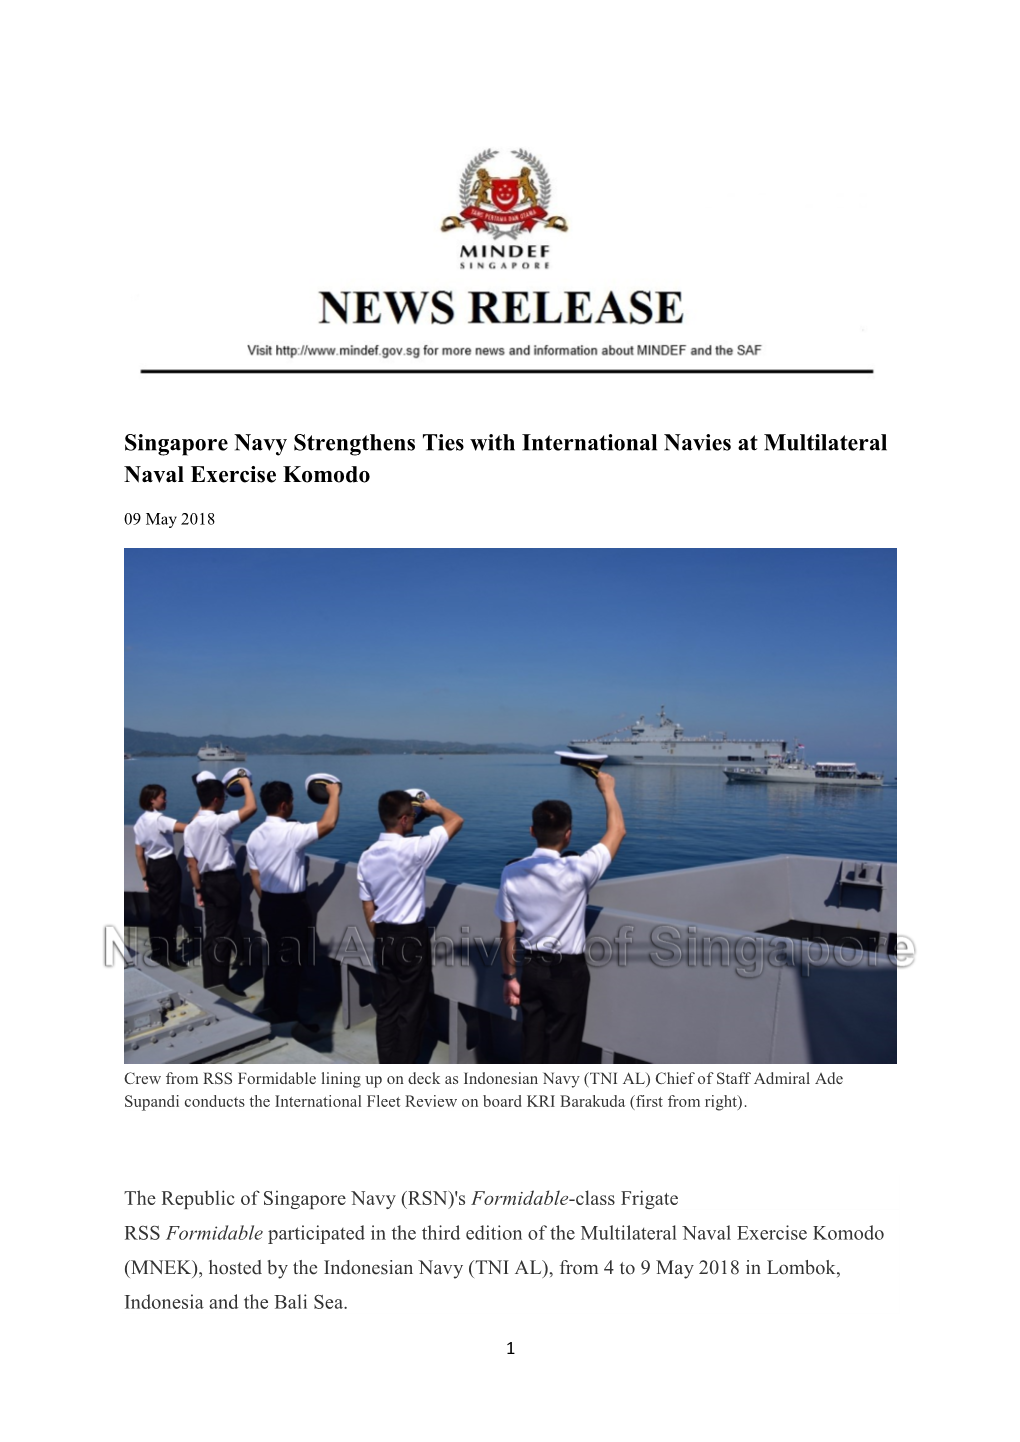 Singapore Navy Strengthens Ties with International Navies at Multilateral Naval Exercise Komodo